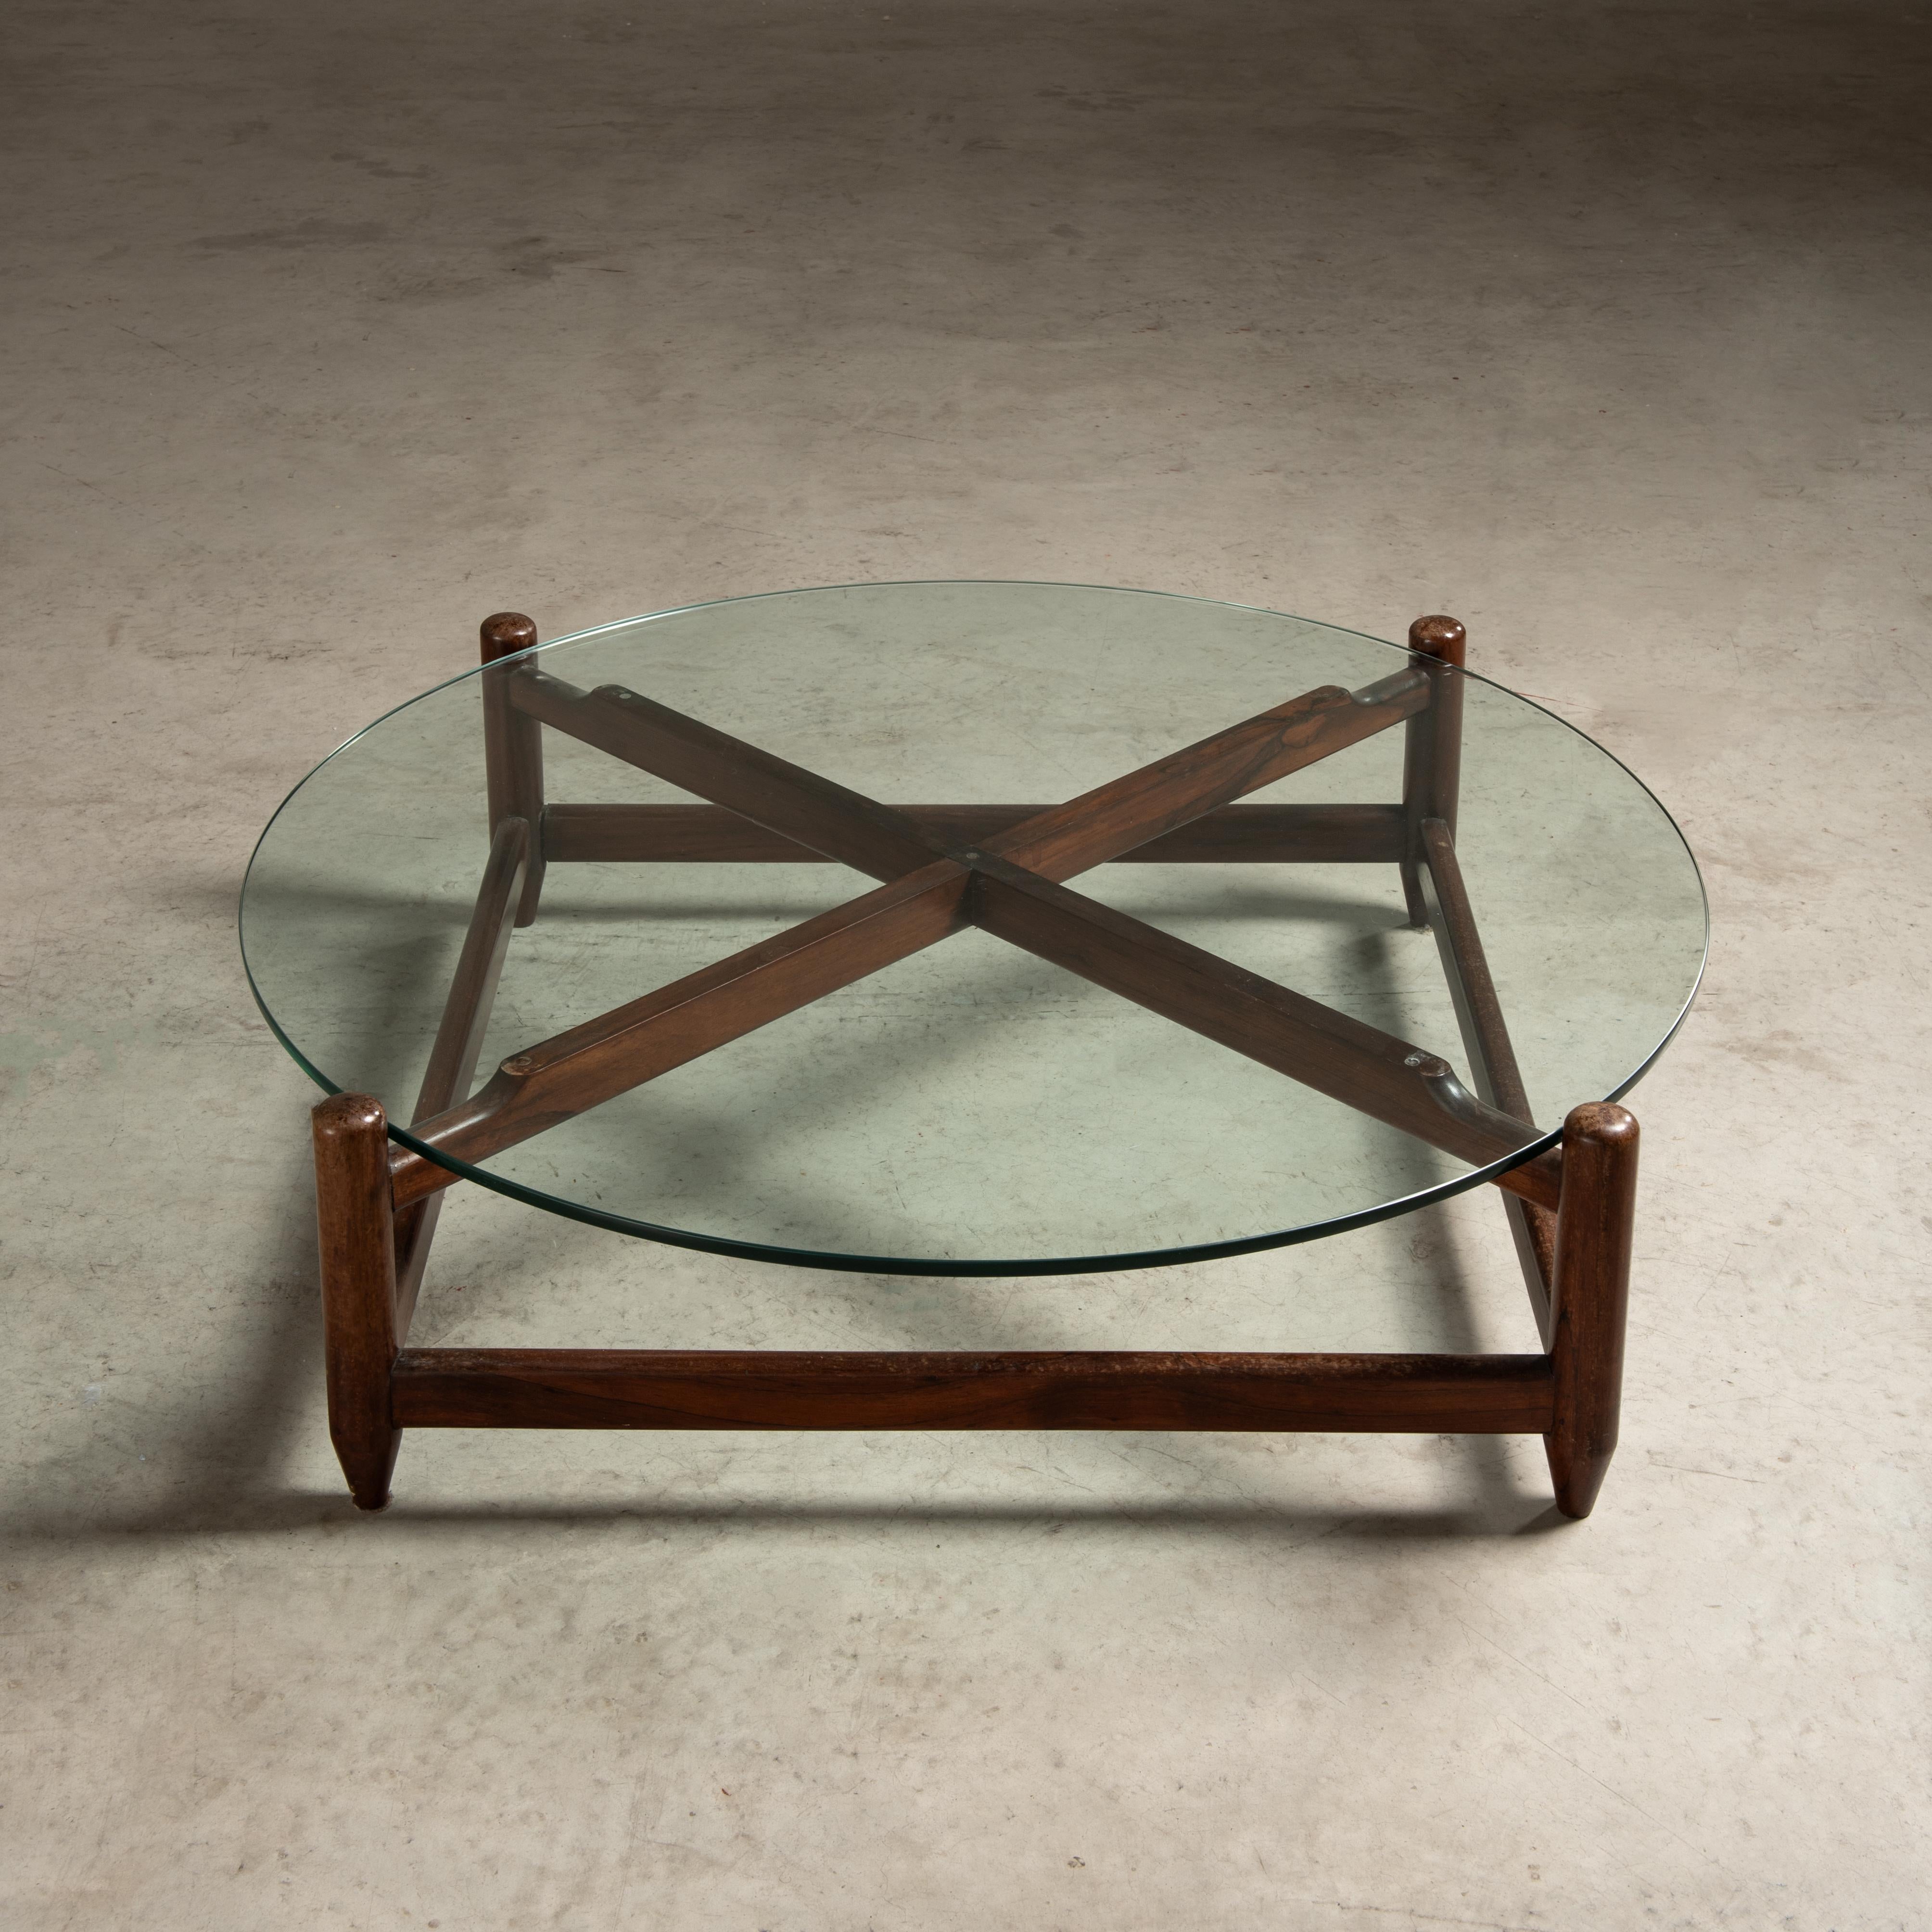 20th Century Rounded Coffee Table in Solid Hardwood and Glass, Brazilian Mid-Century Modern For Sale